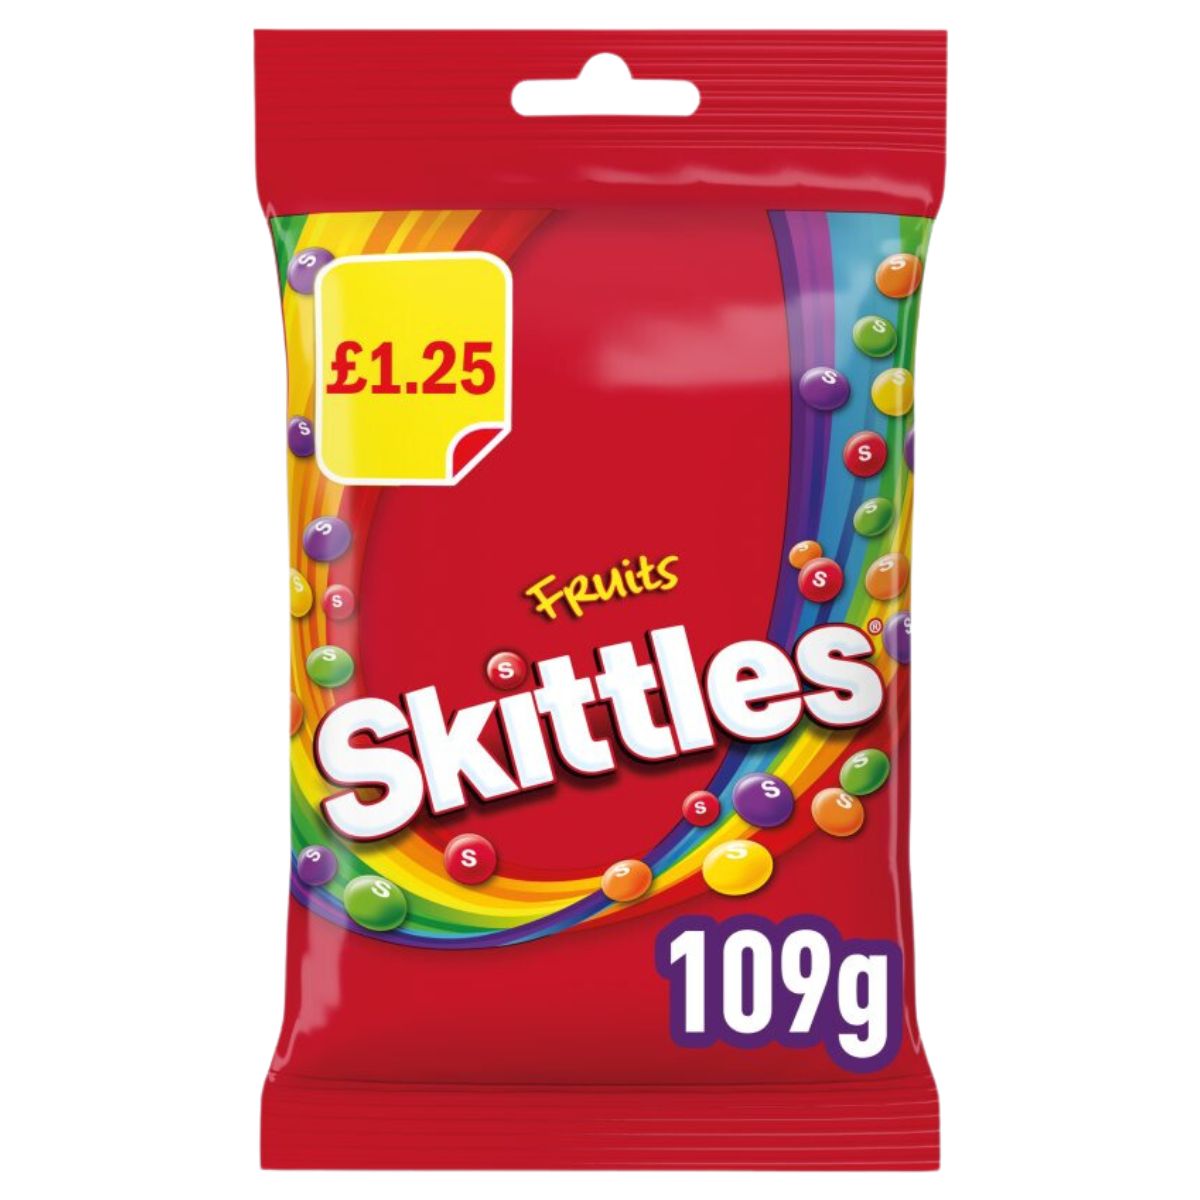 A Skittles - Fruits Treat Bag - 109g on a white background.